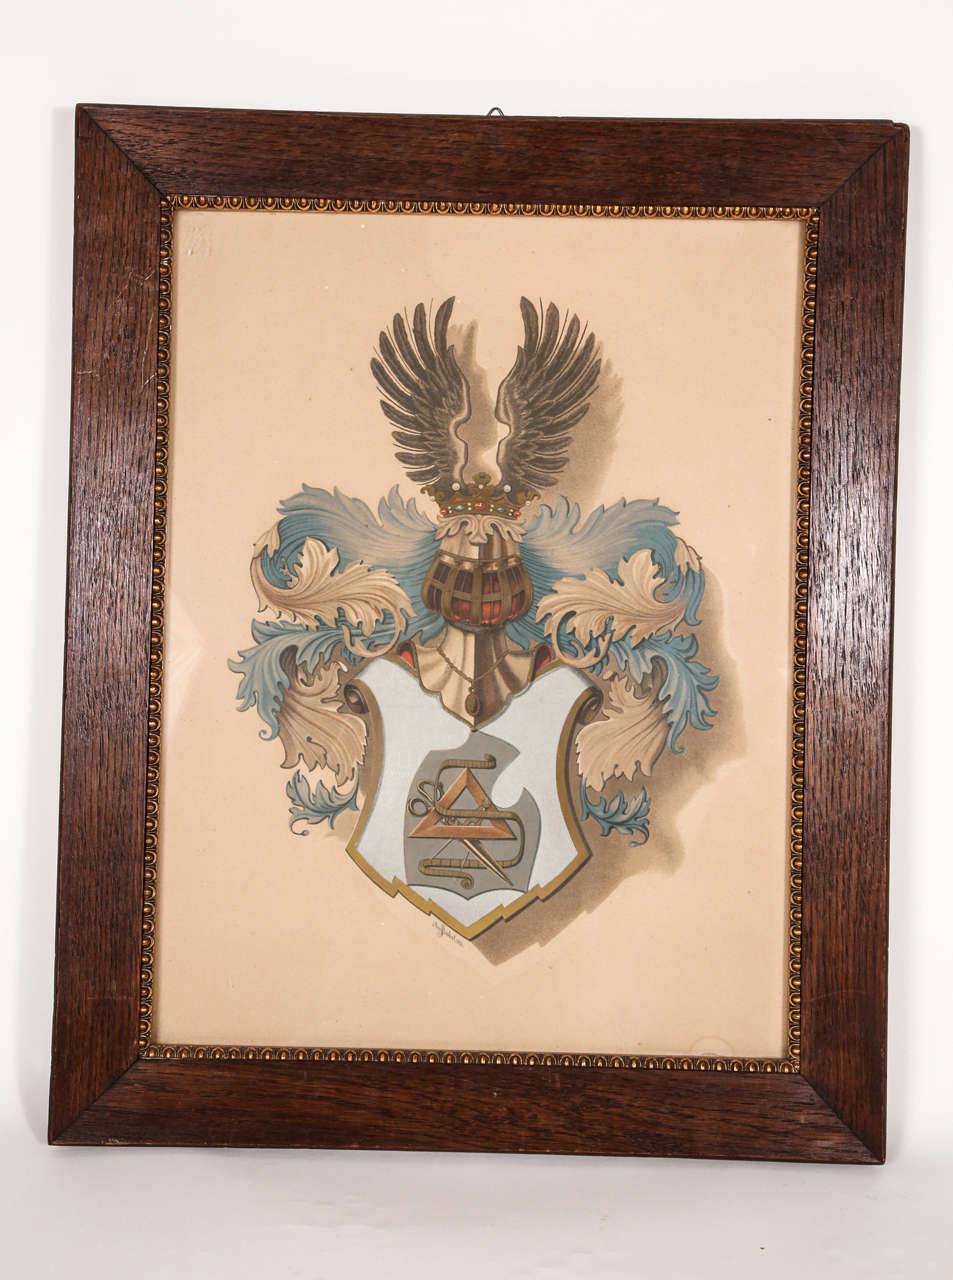 Vintage print of a heraldic crest on paper with distressed wooden frame.